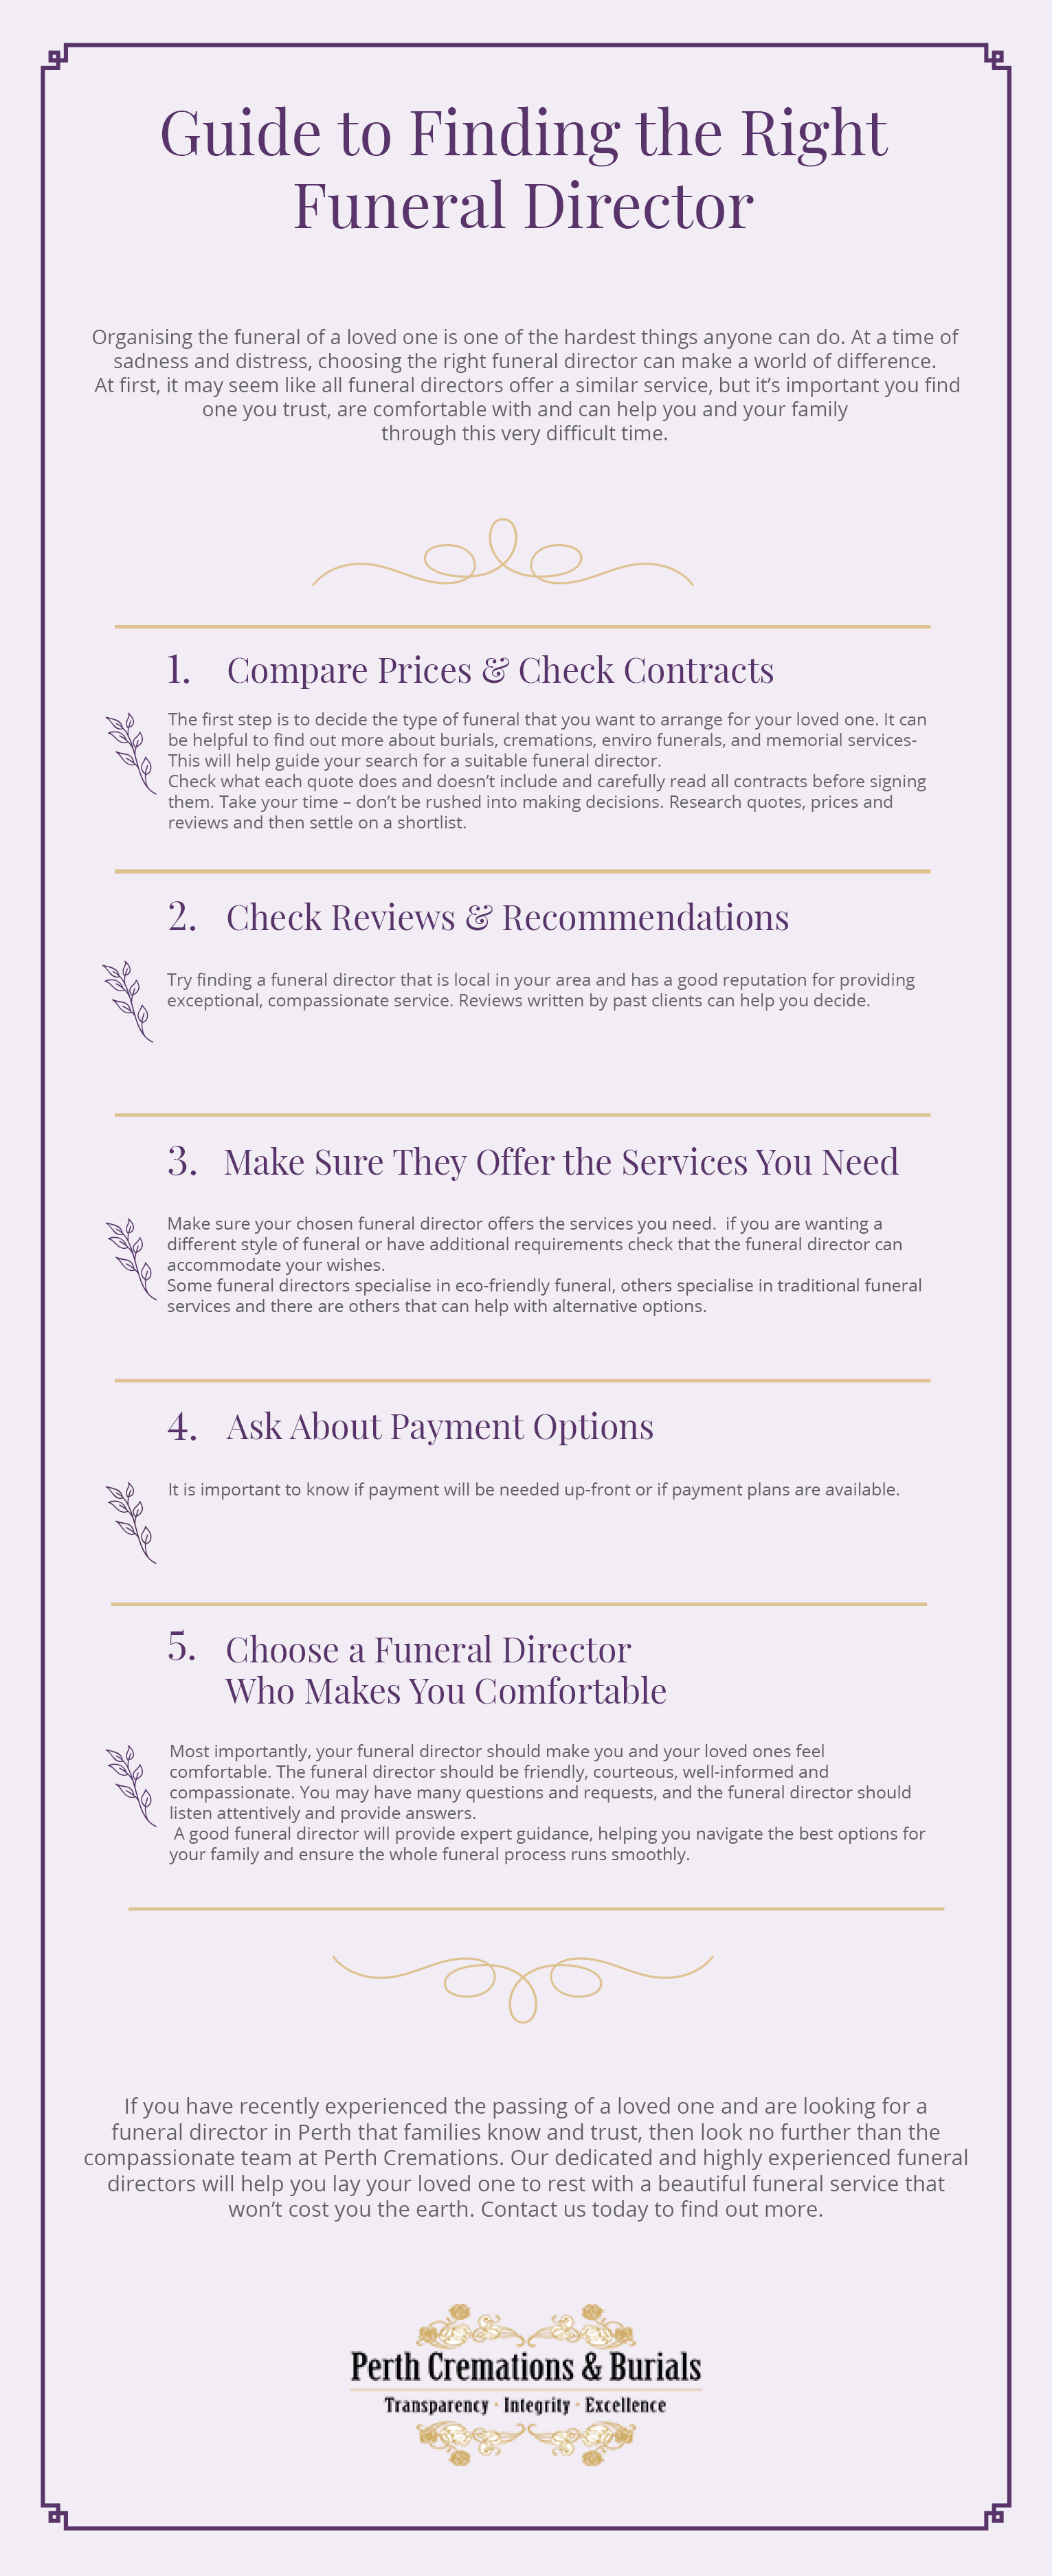 guide-to-finding-the-right-funeral-director-perth-cremations-burials